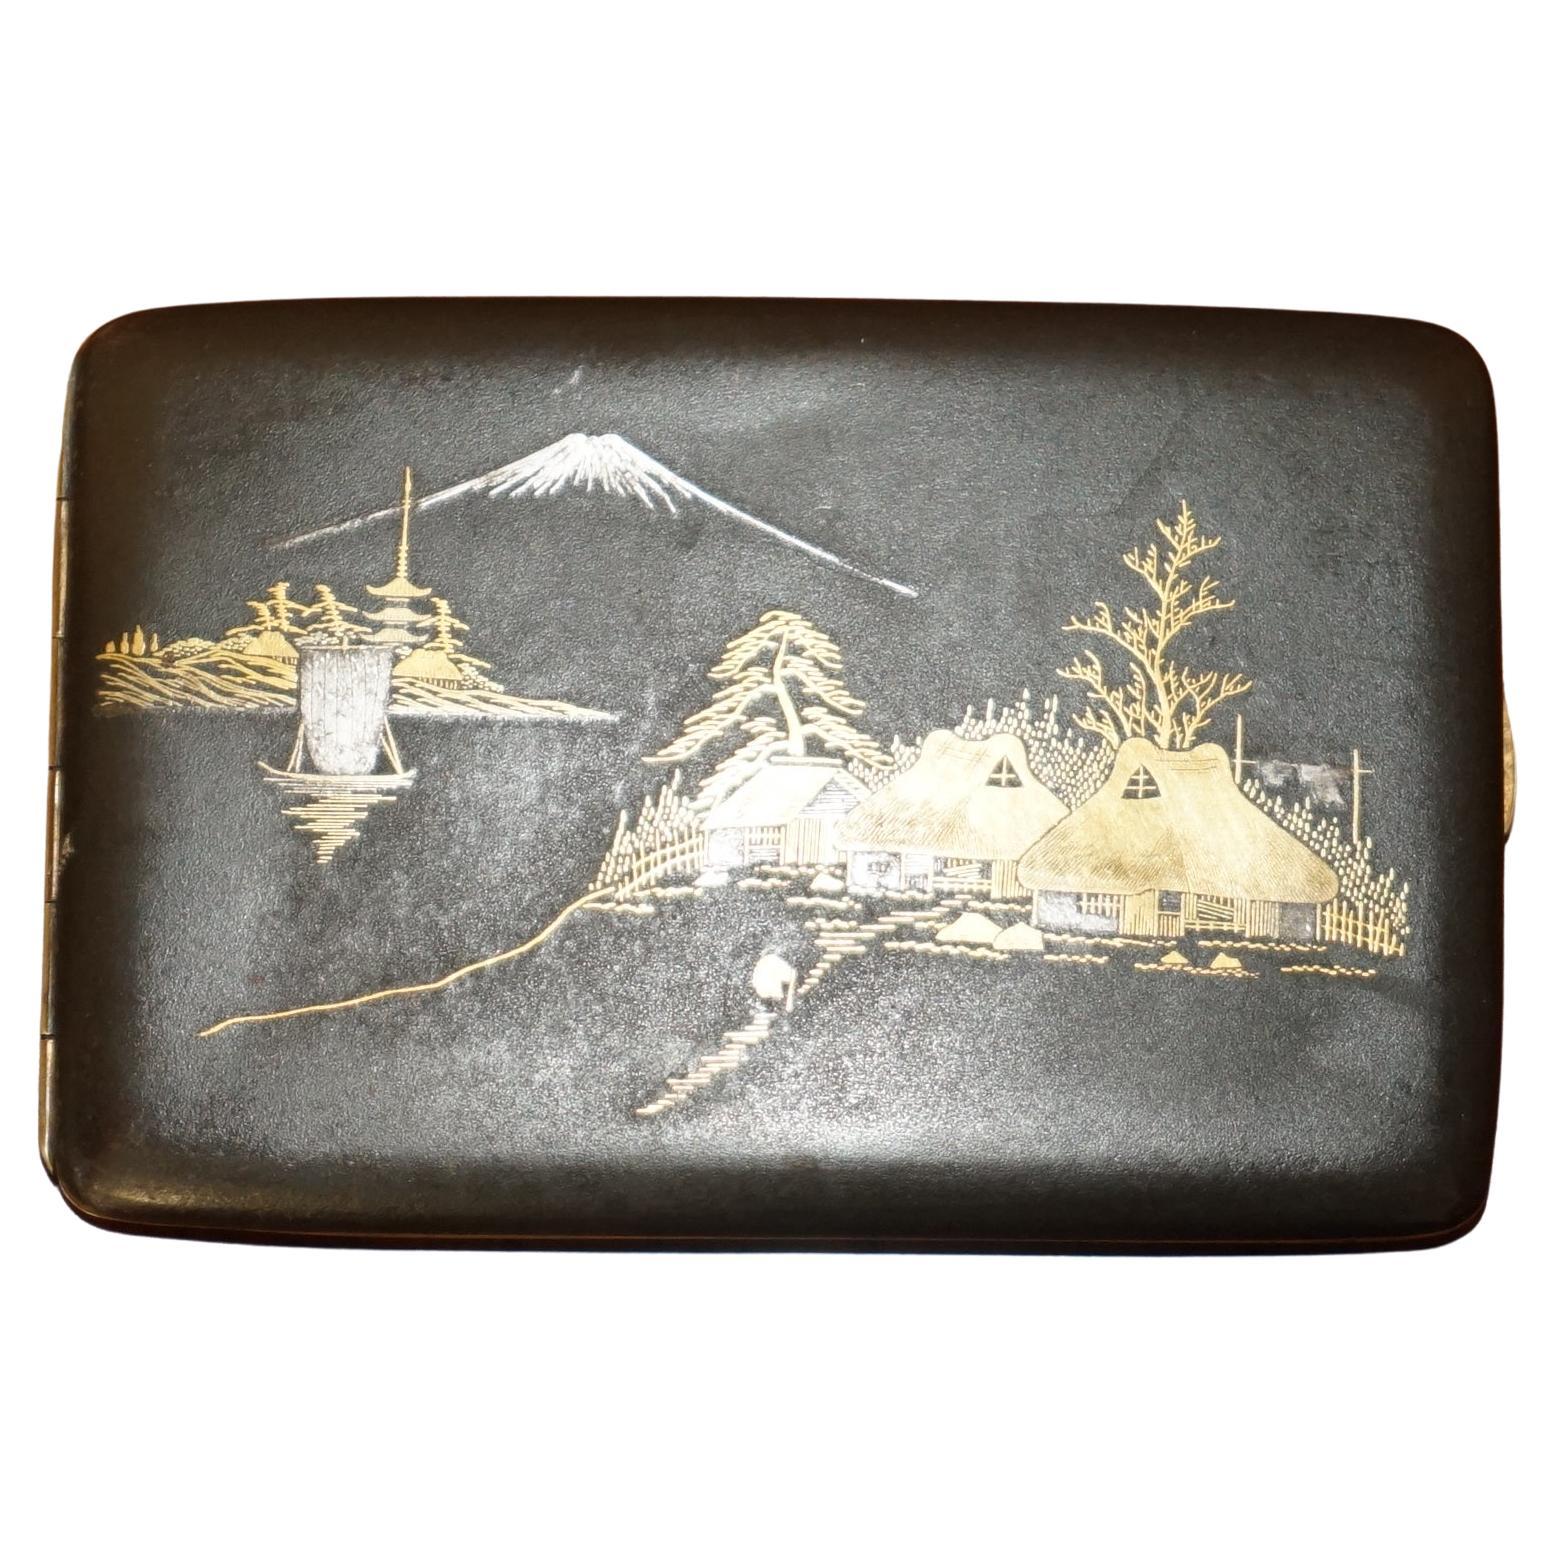 SIGNED & STAMPED ANTIQUE 24CT GOLD INLAID JAPANESE KOMEI WORK CiGARETTE CASE For Sale